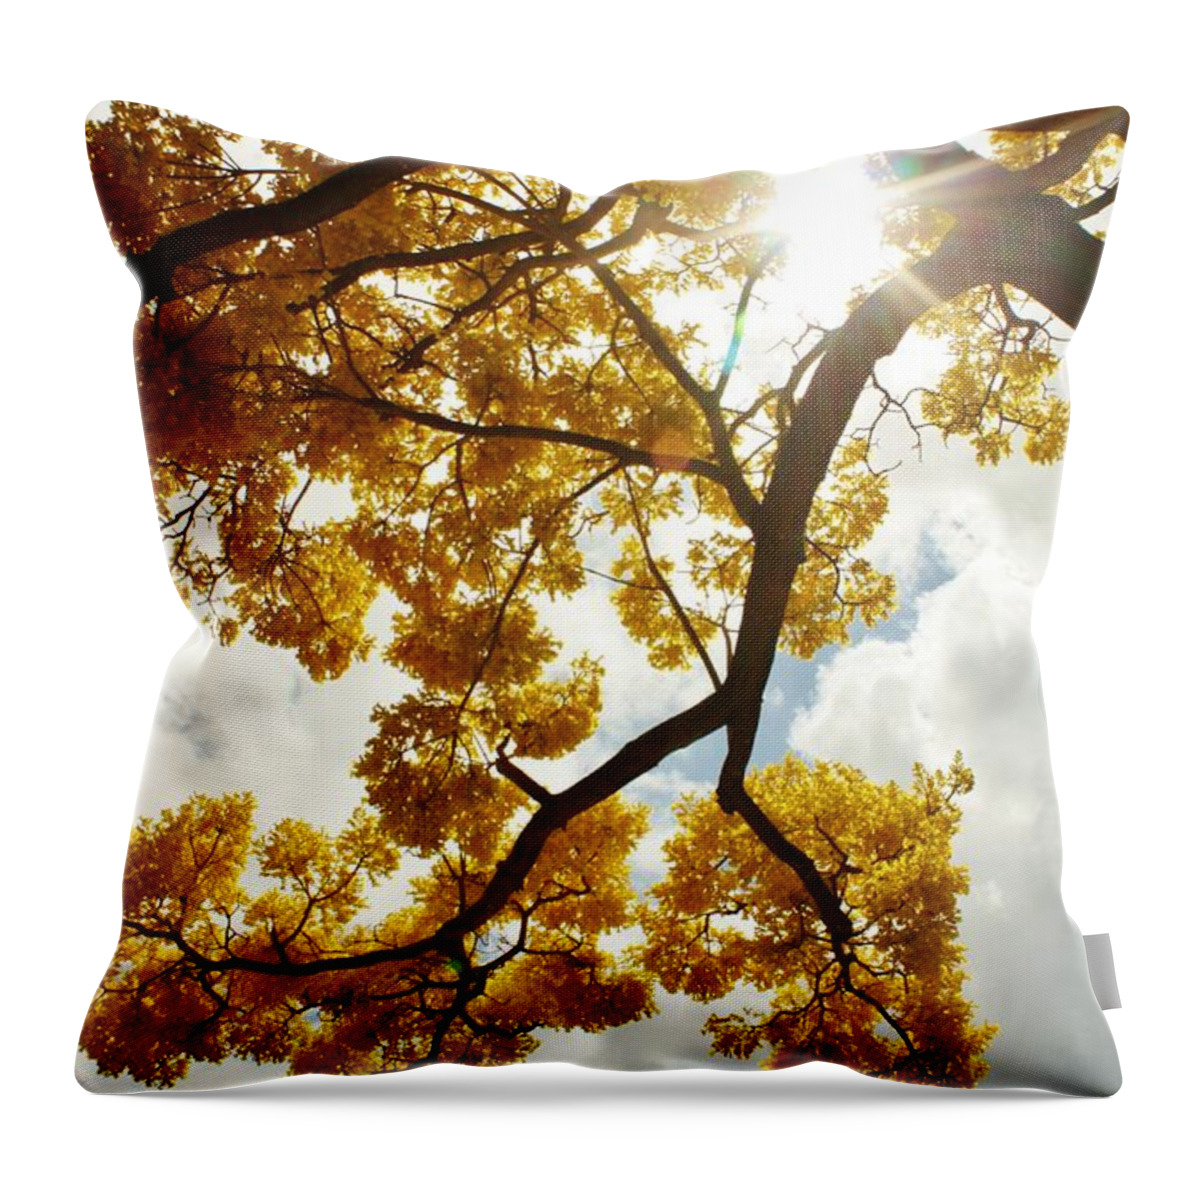 Tabebuia Chrysotraicha Throw Pillow featuring the photograph Spring by Craig Wood